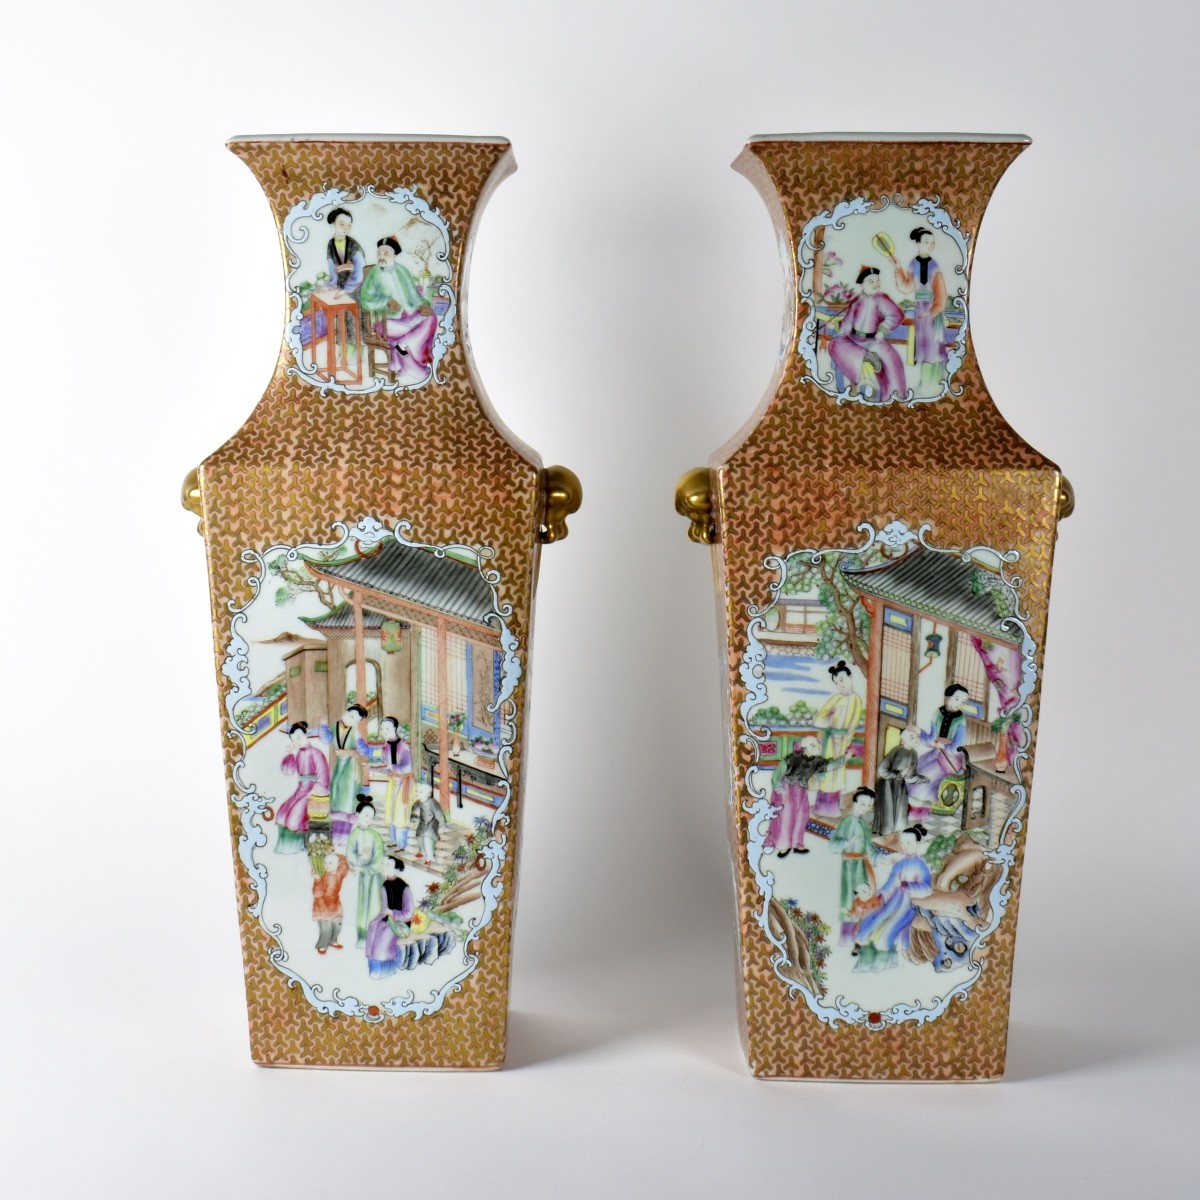 Pair of Chinese Export Porcelain Vases